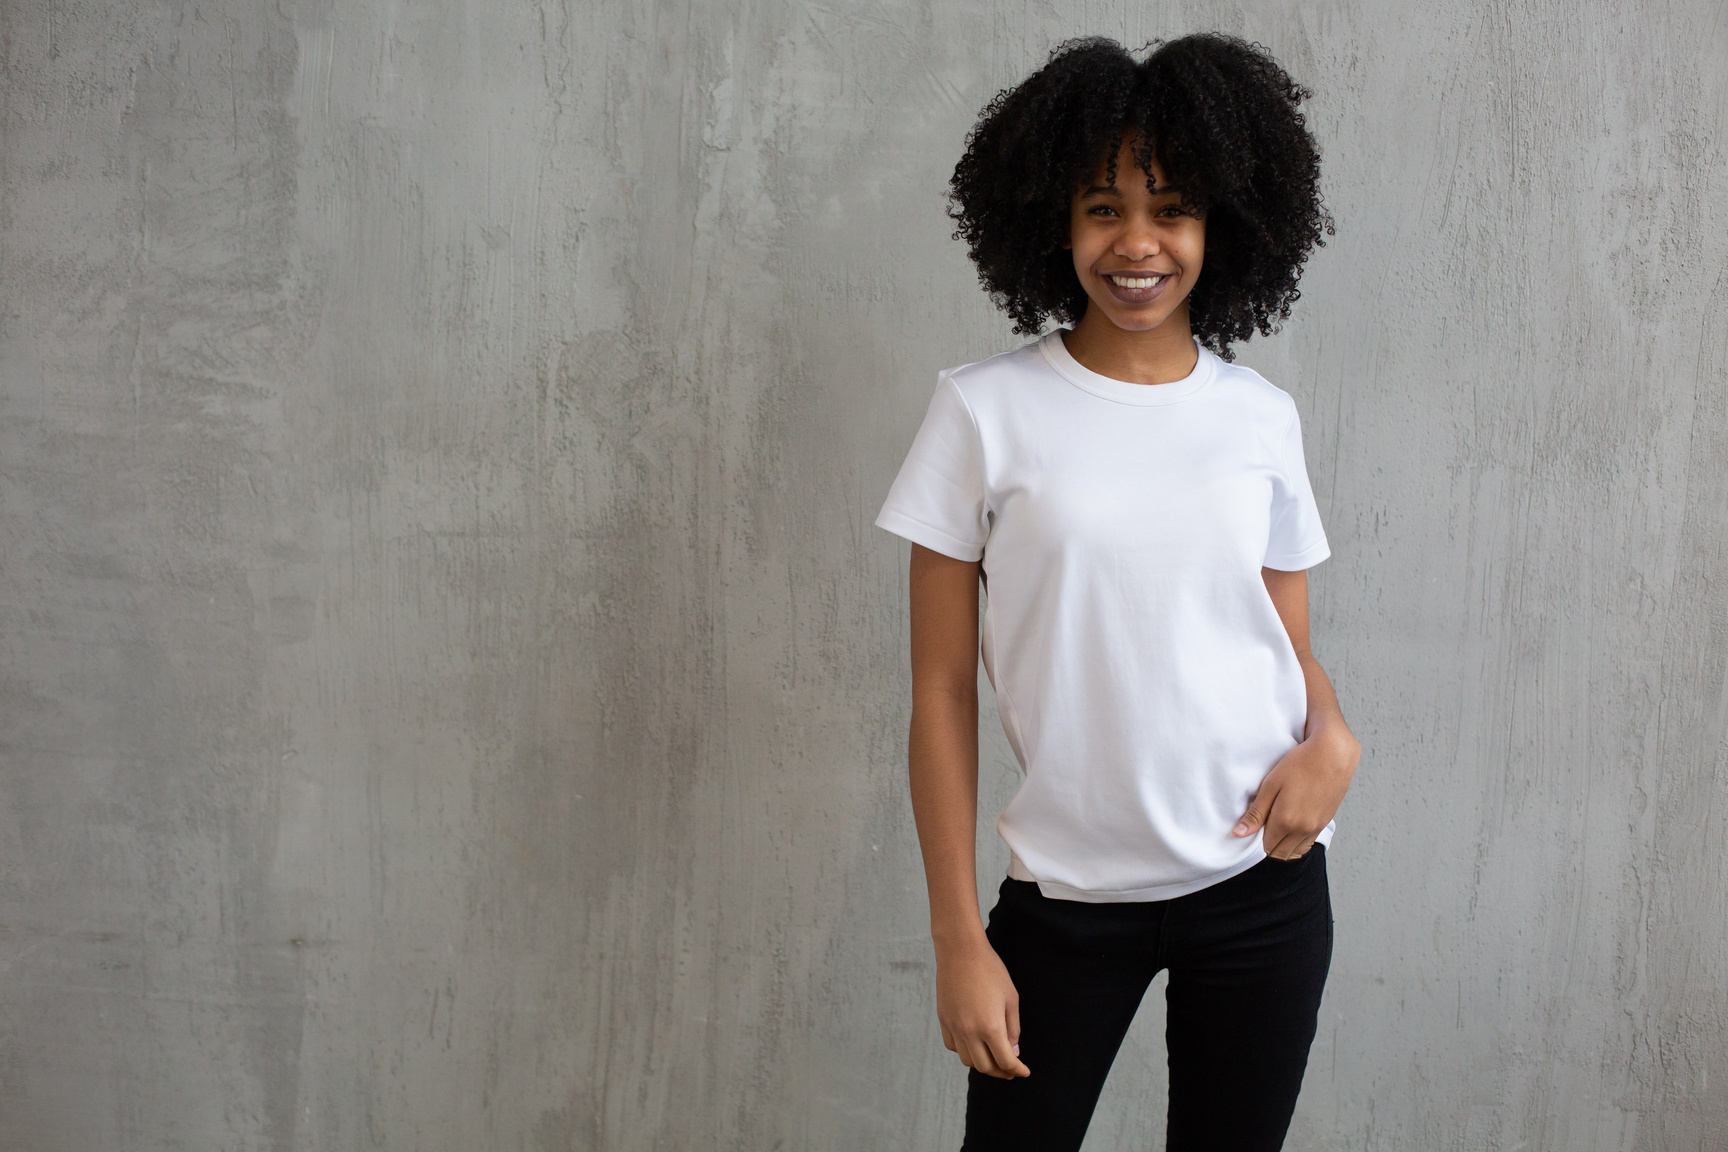 Smiling black woman in white t shirt and pants